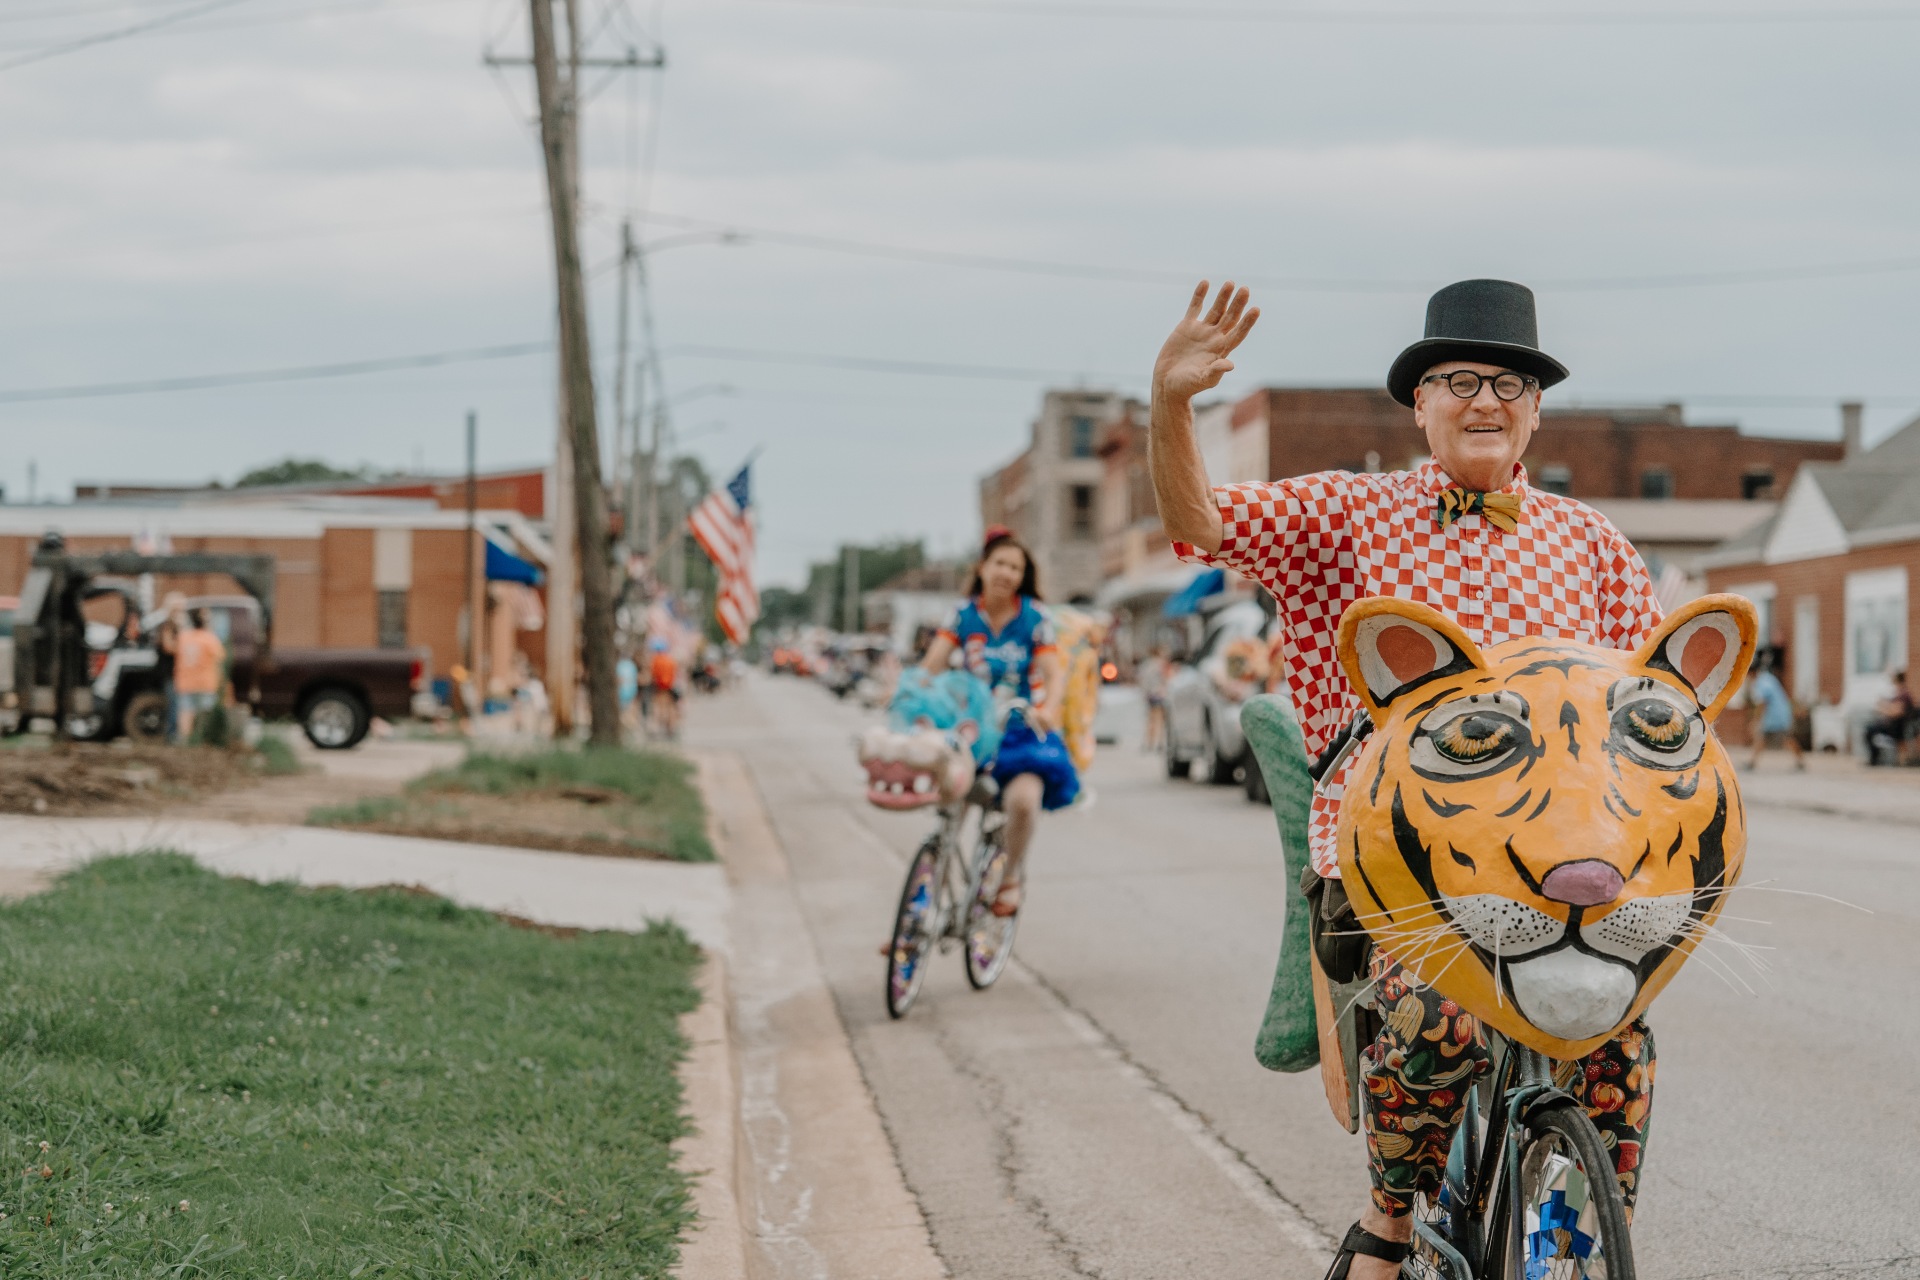 A man in a top hat waves at the camera while riding a bike with a paper mache tiger head attached to the front